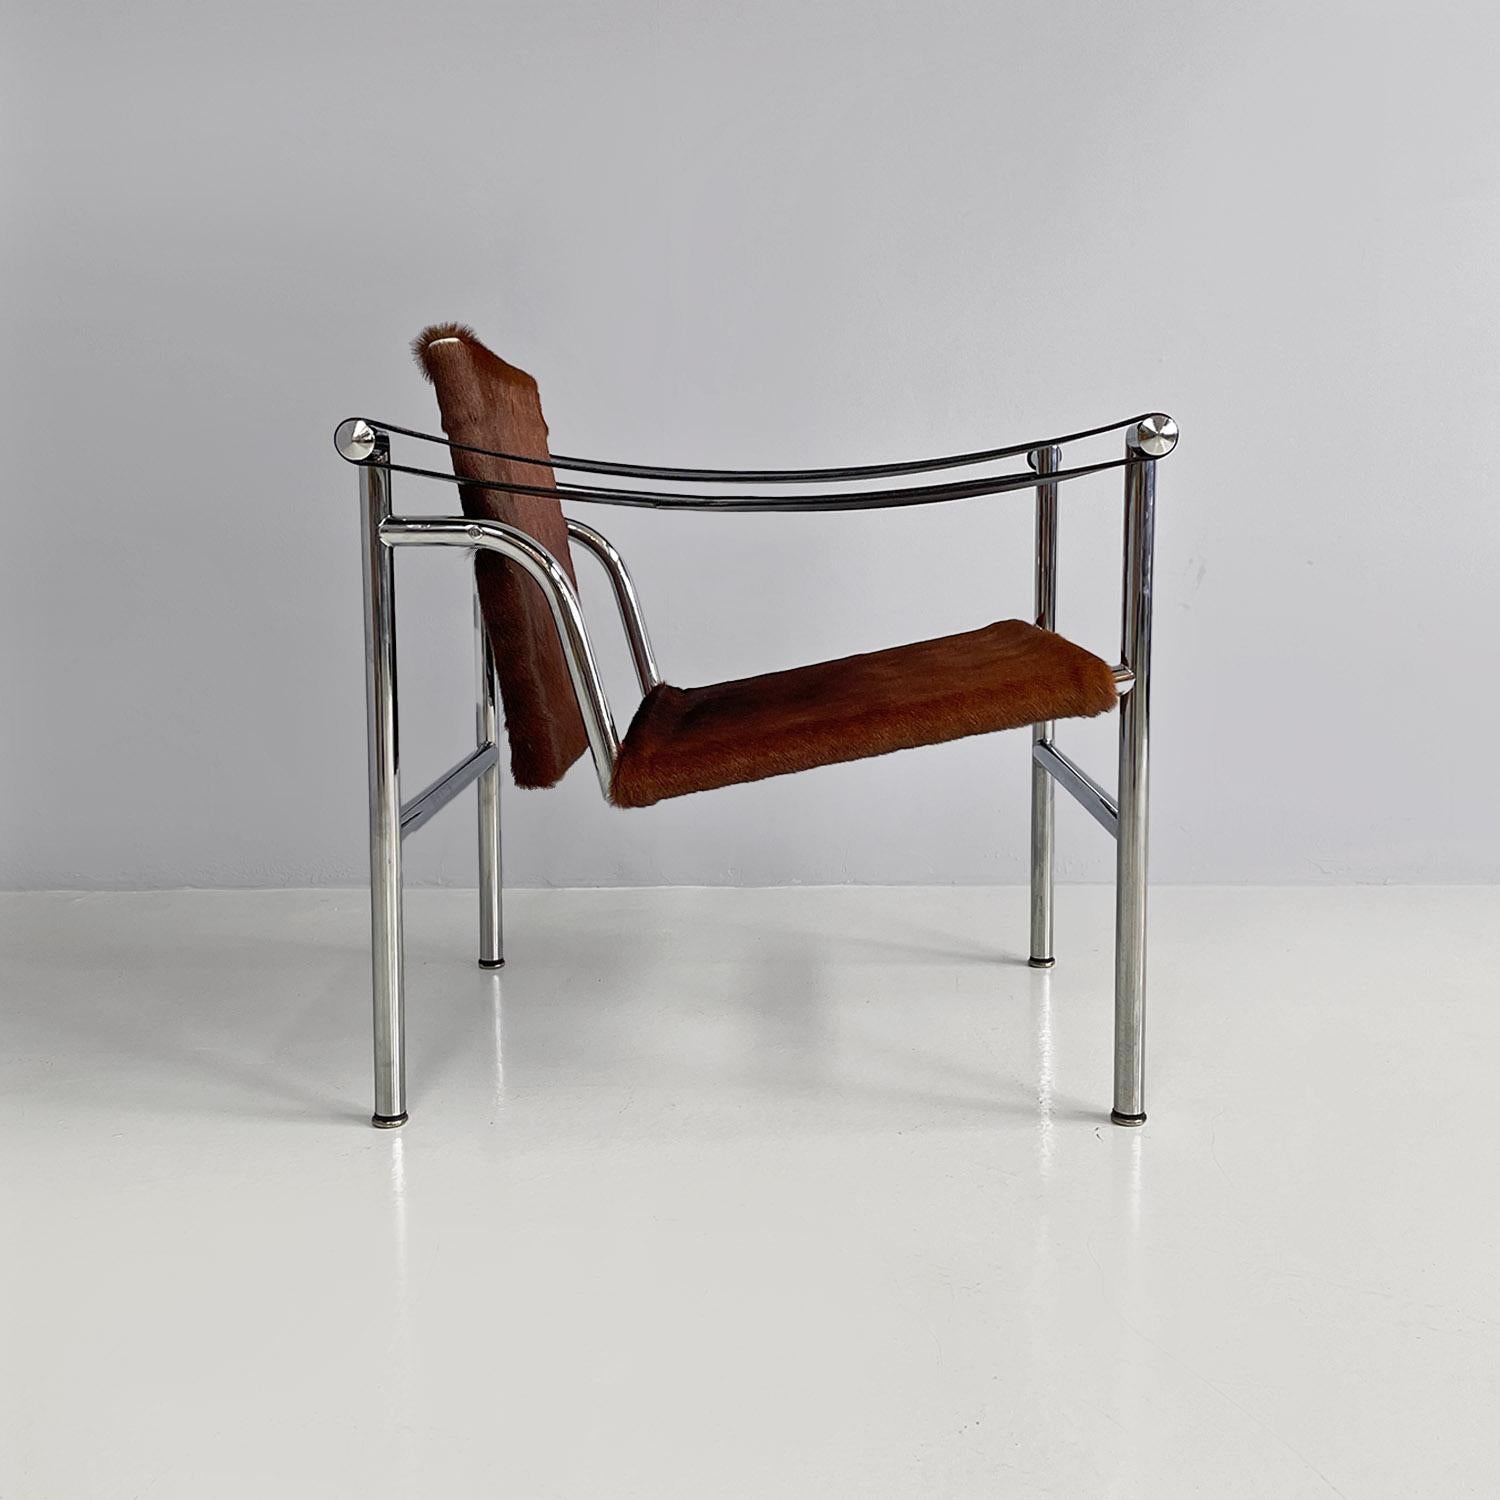 Italian modern LC1 armchair, Le Corbusier, Jeanneret and Perriand, Cassina 1960s In Good Condition For Sale In MIlano, IT